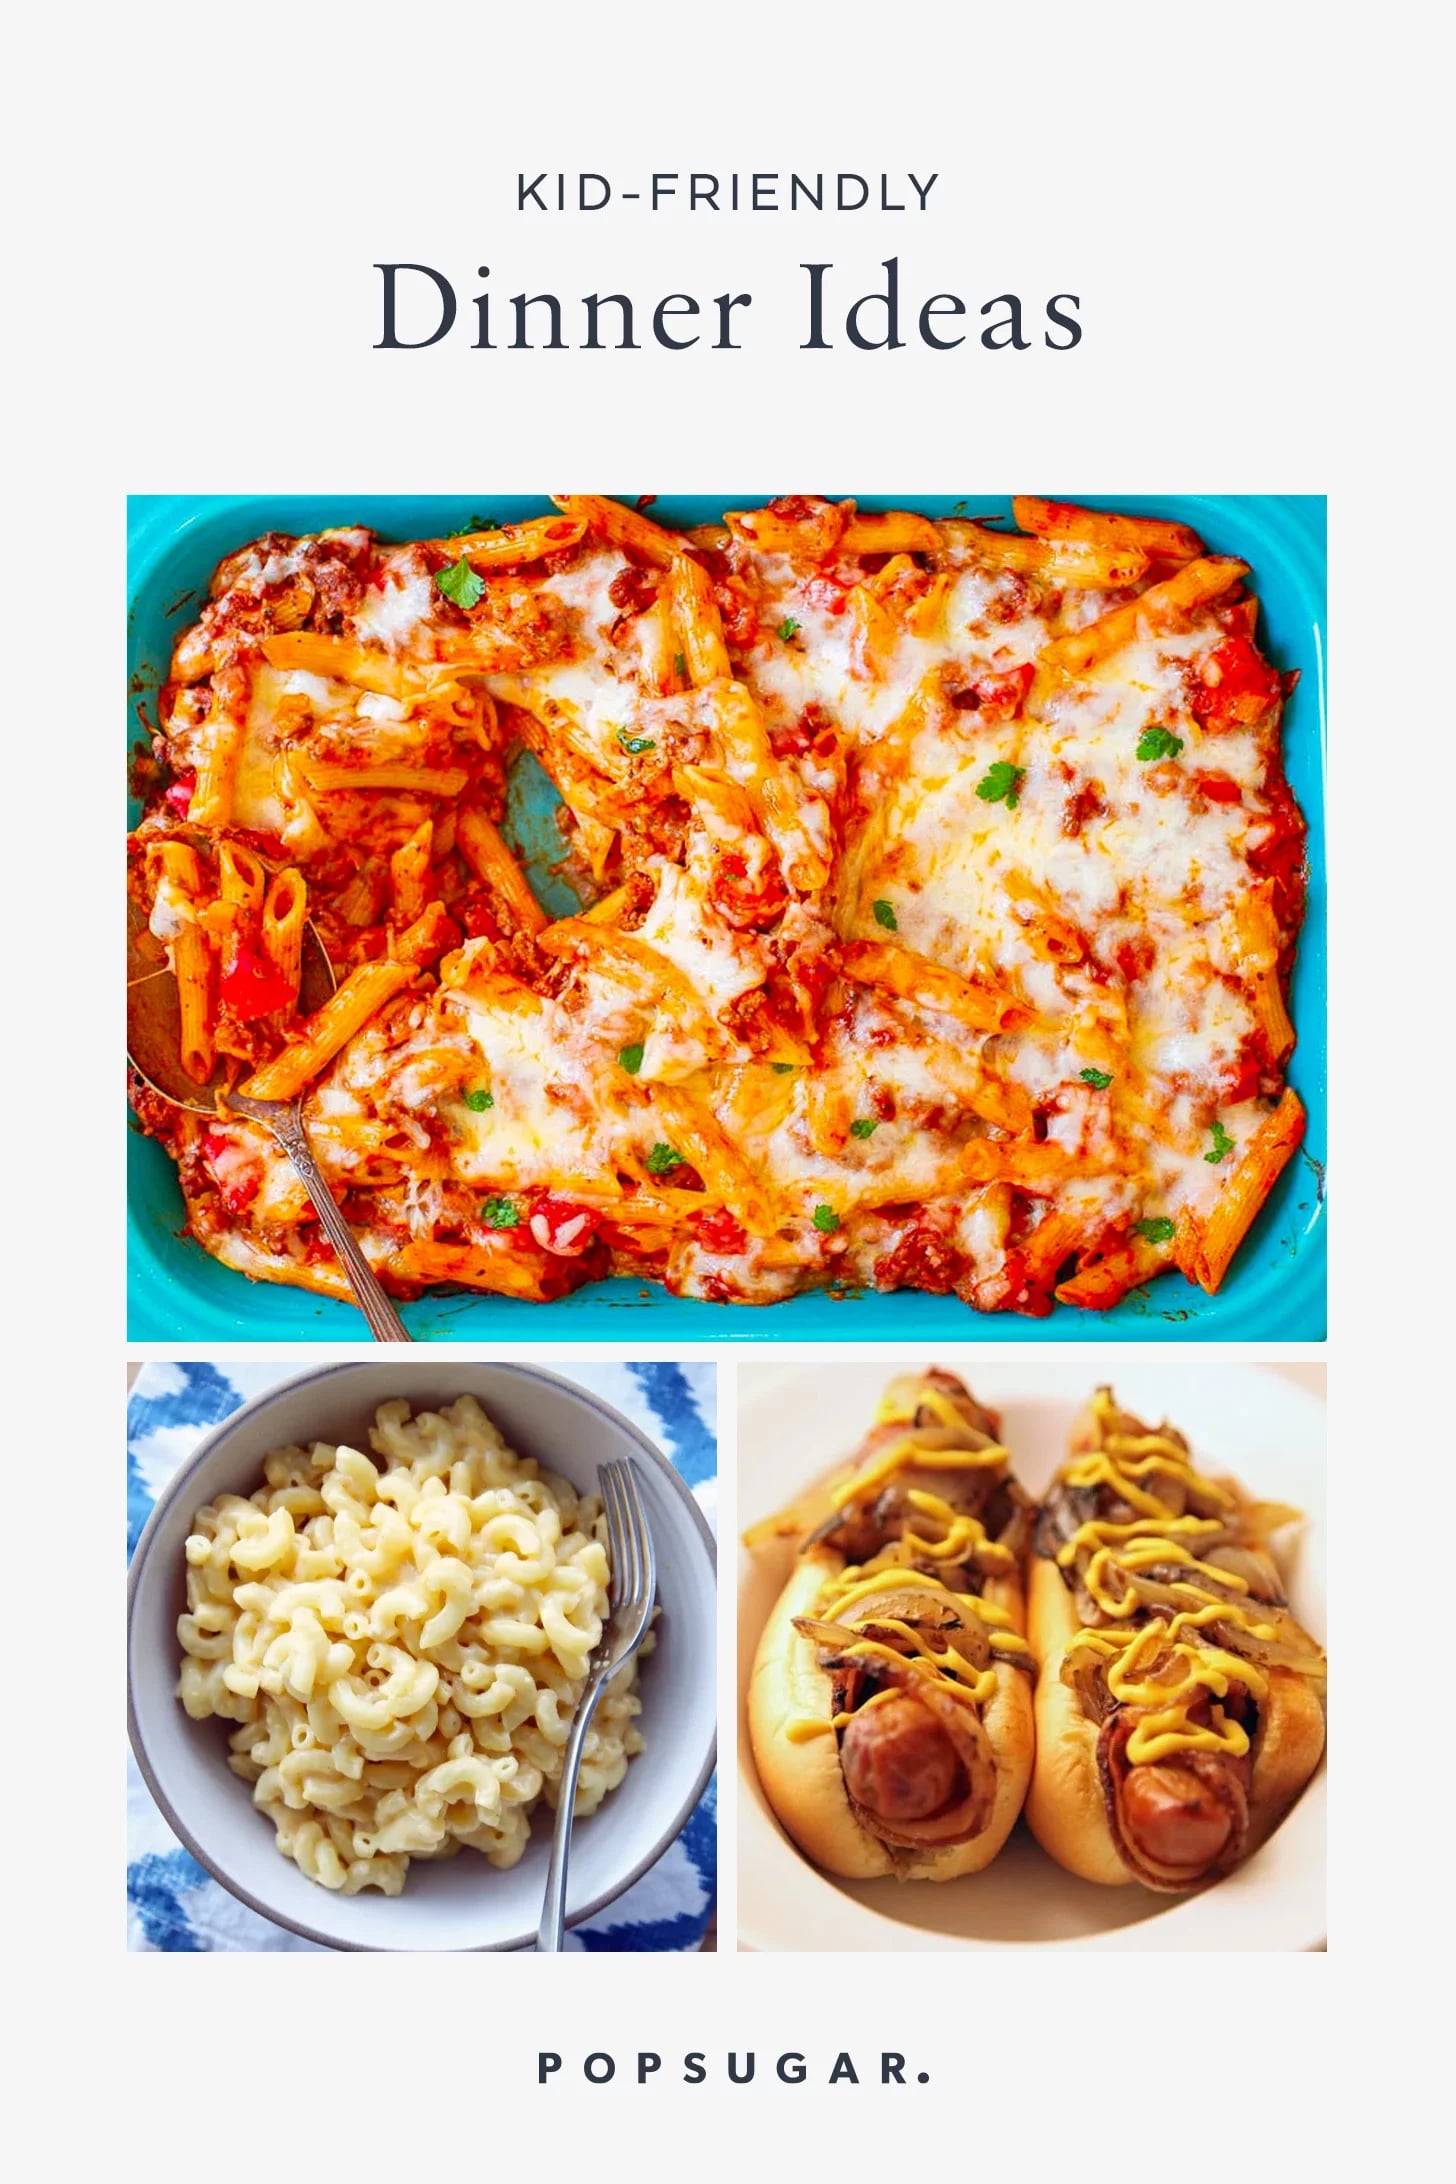 29 Easy Dinner Ideas For Kids - Plowing Through Life